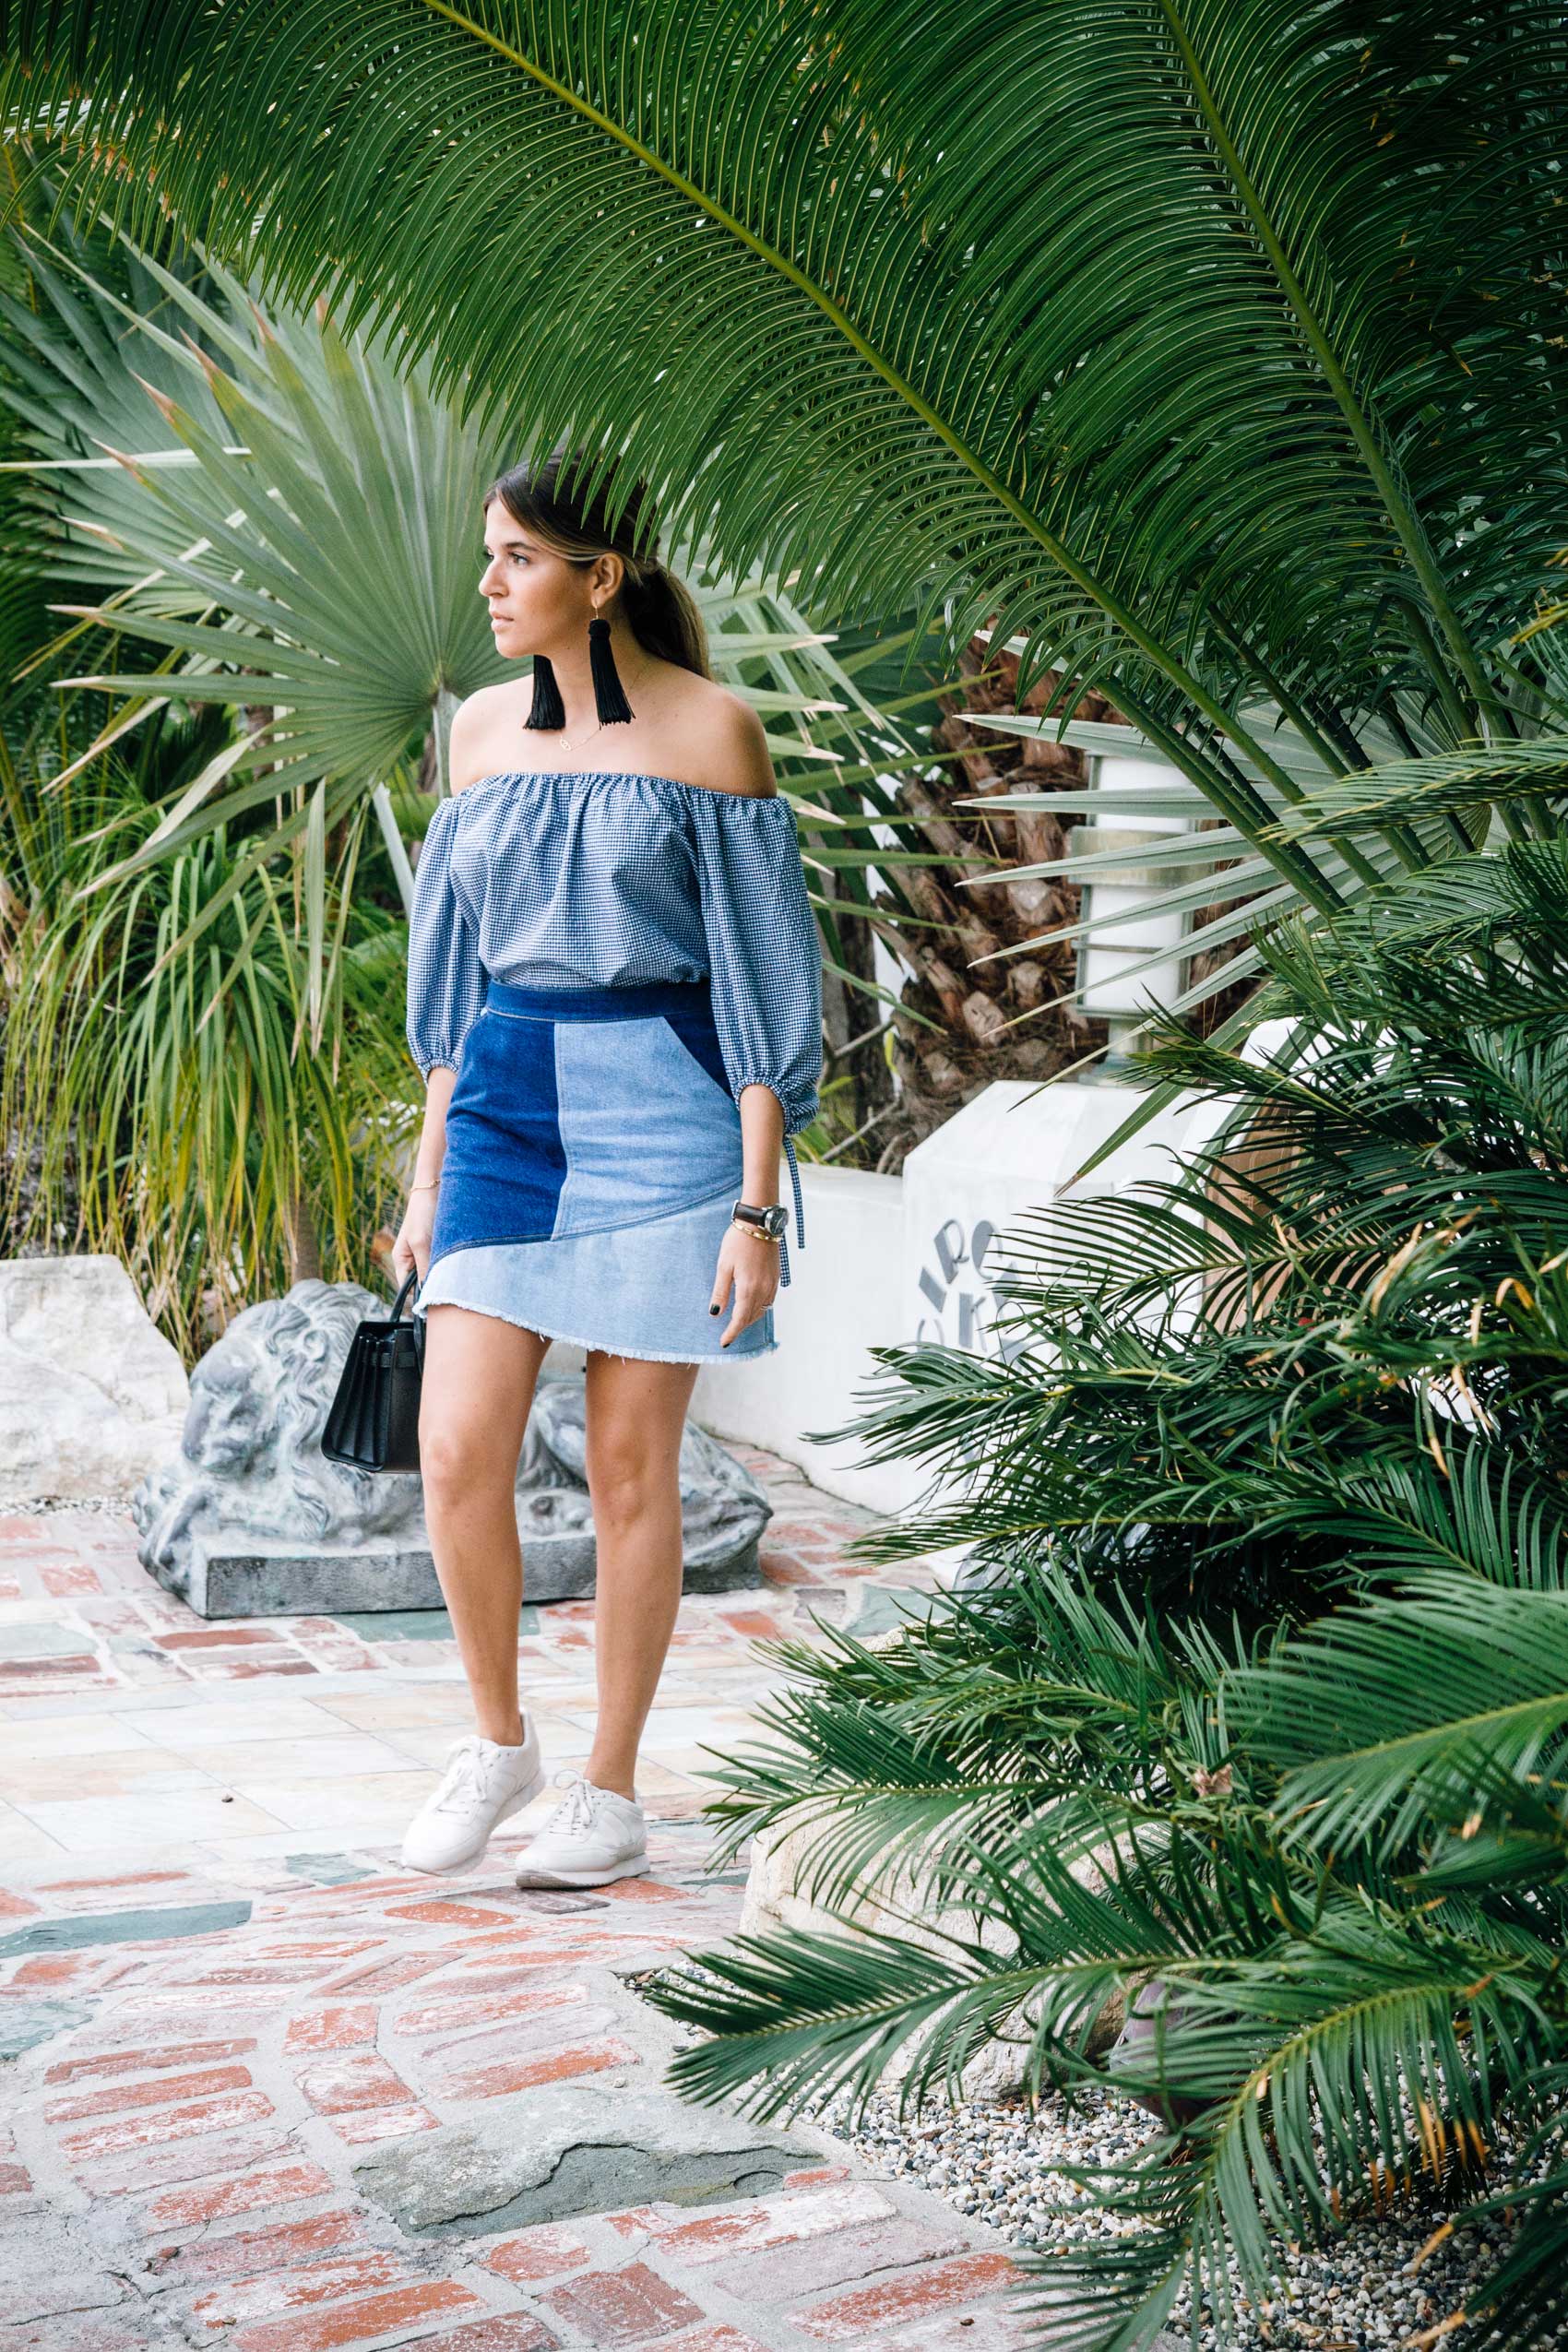 All blue denim and gingham look with white sneakers and statement earrings by Maristella Gonzalez